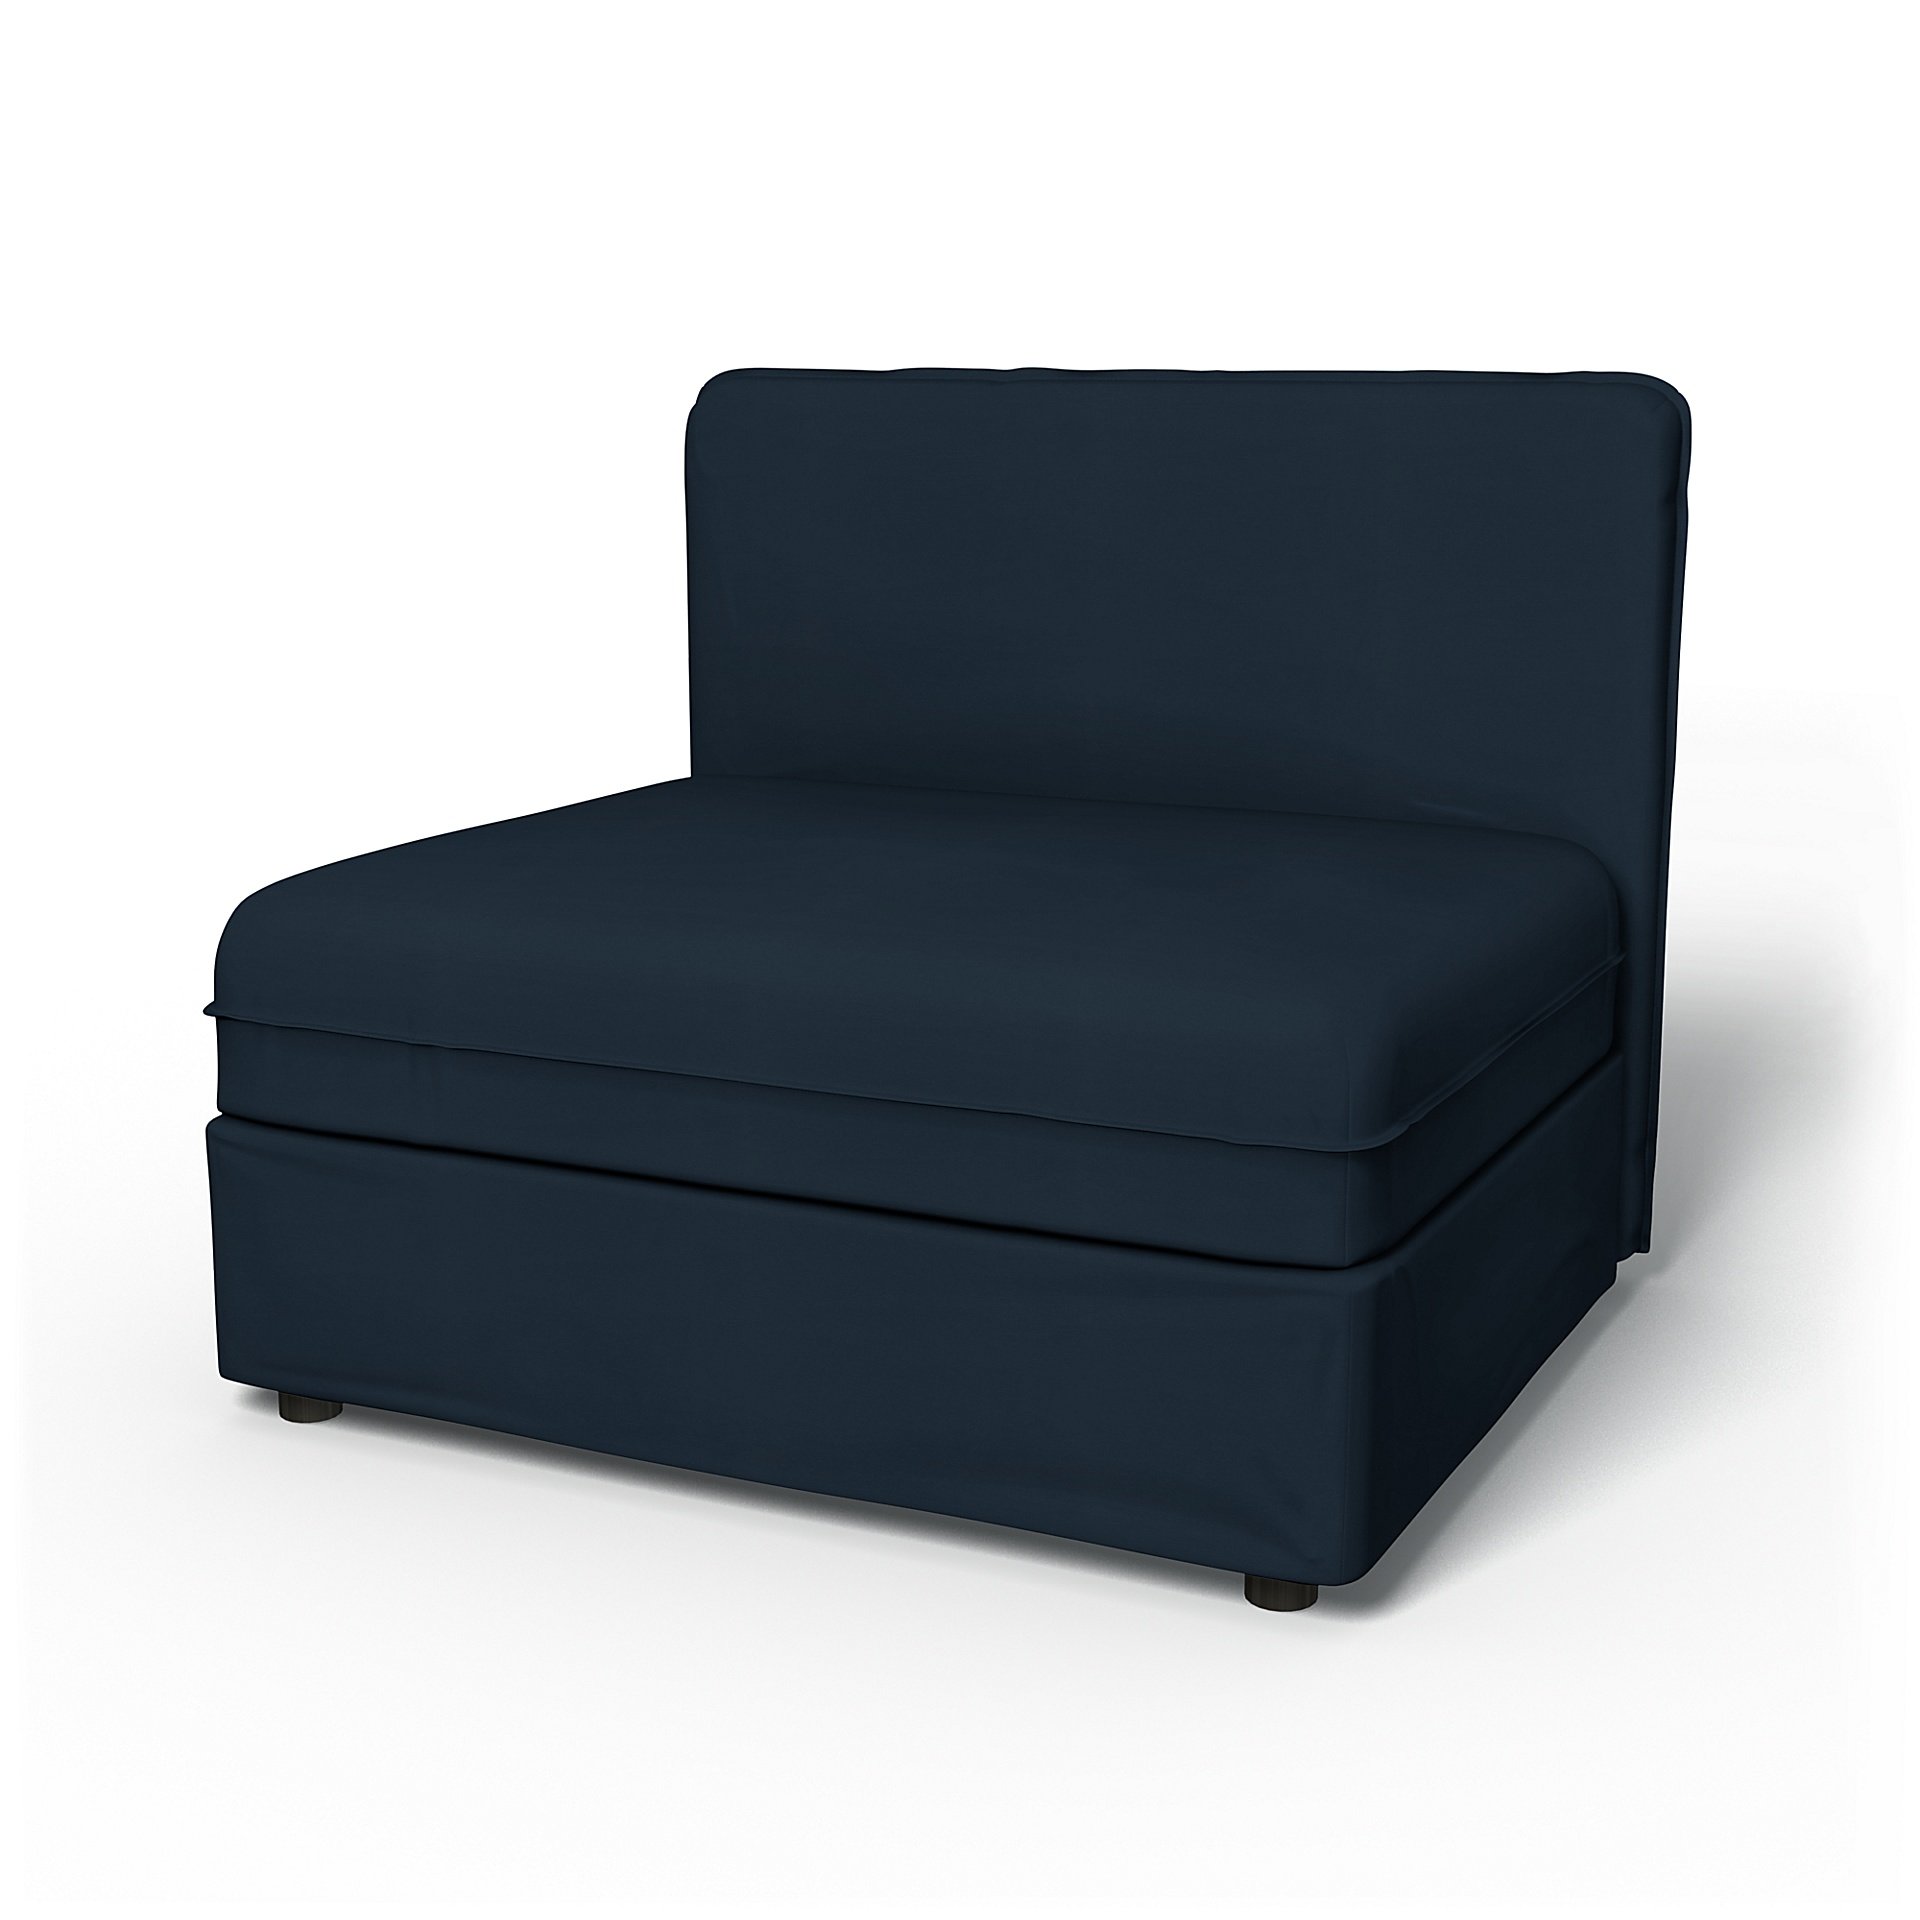 IKEA - Vallentuna Seat Module with Low Back Cover 100x80cm 39x32in, Navy Blue, Cotton - Bemz